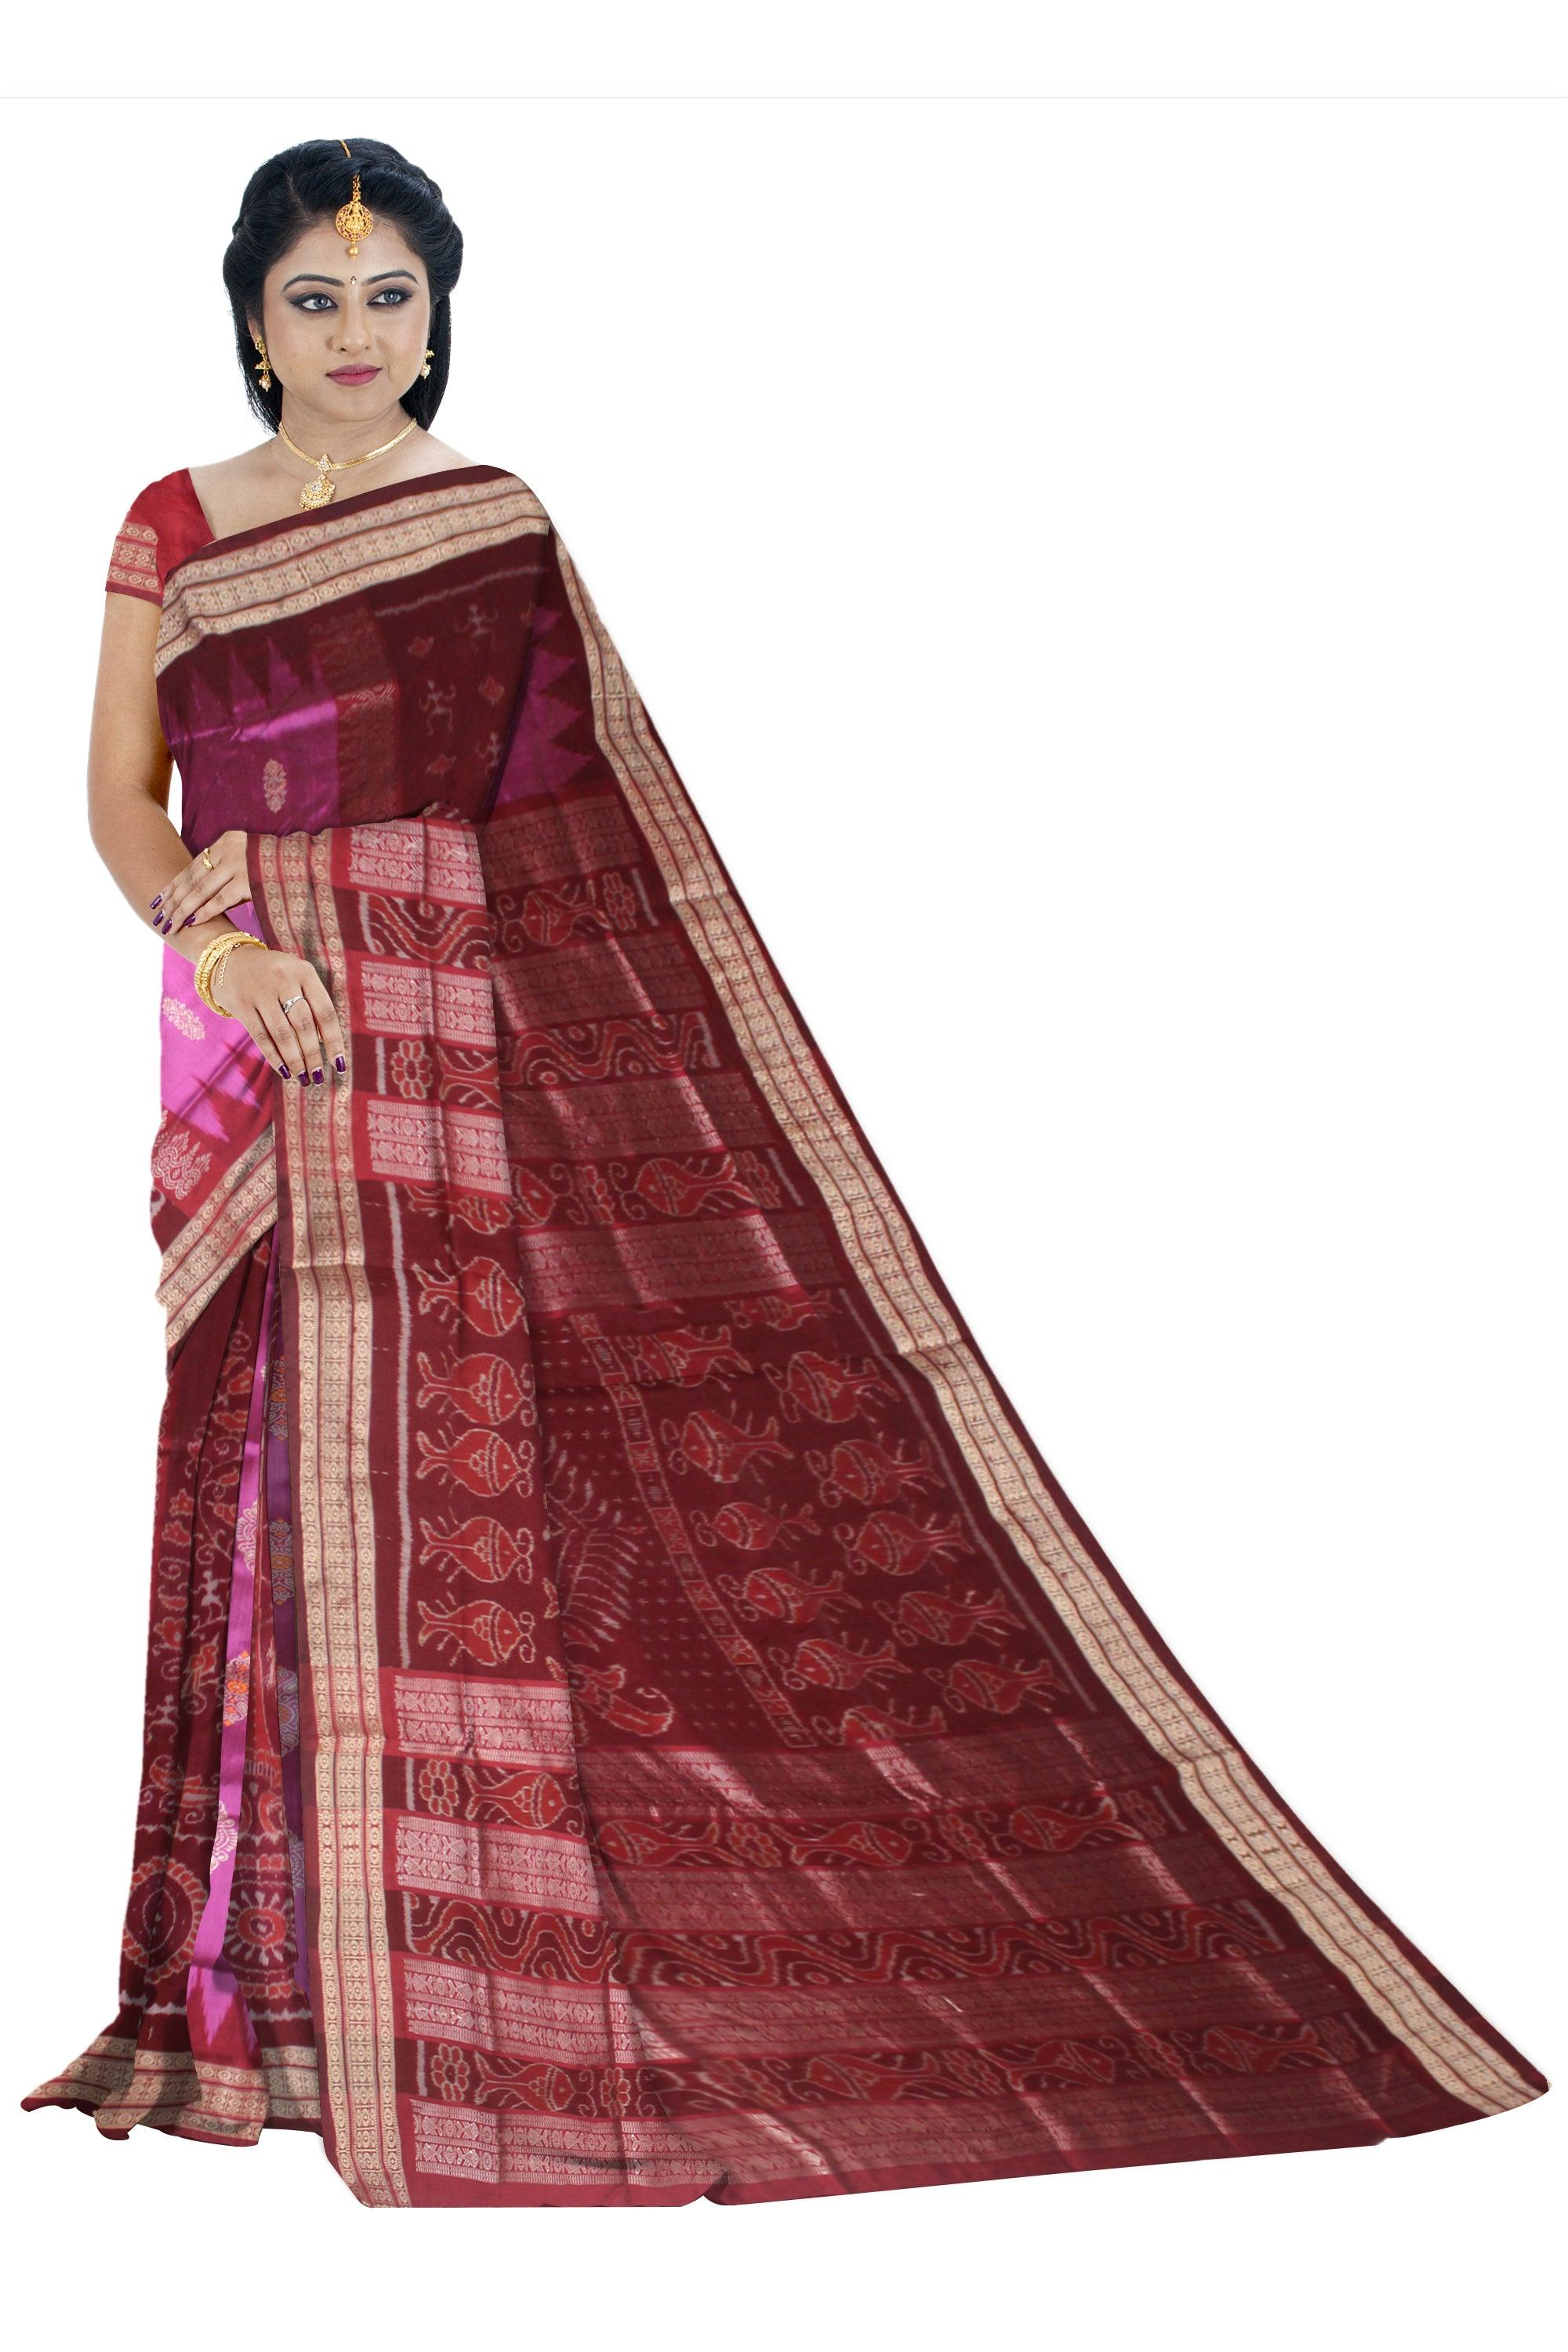 Pink Color  Mix Pata saree in bomkai pattern and Flower in Body  with blouse piece. - Koshali Arts & Crafts Enterprise